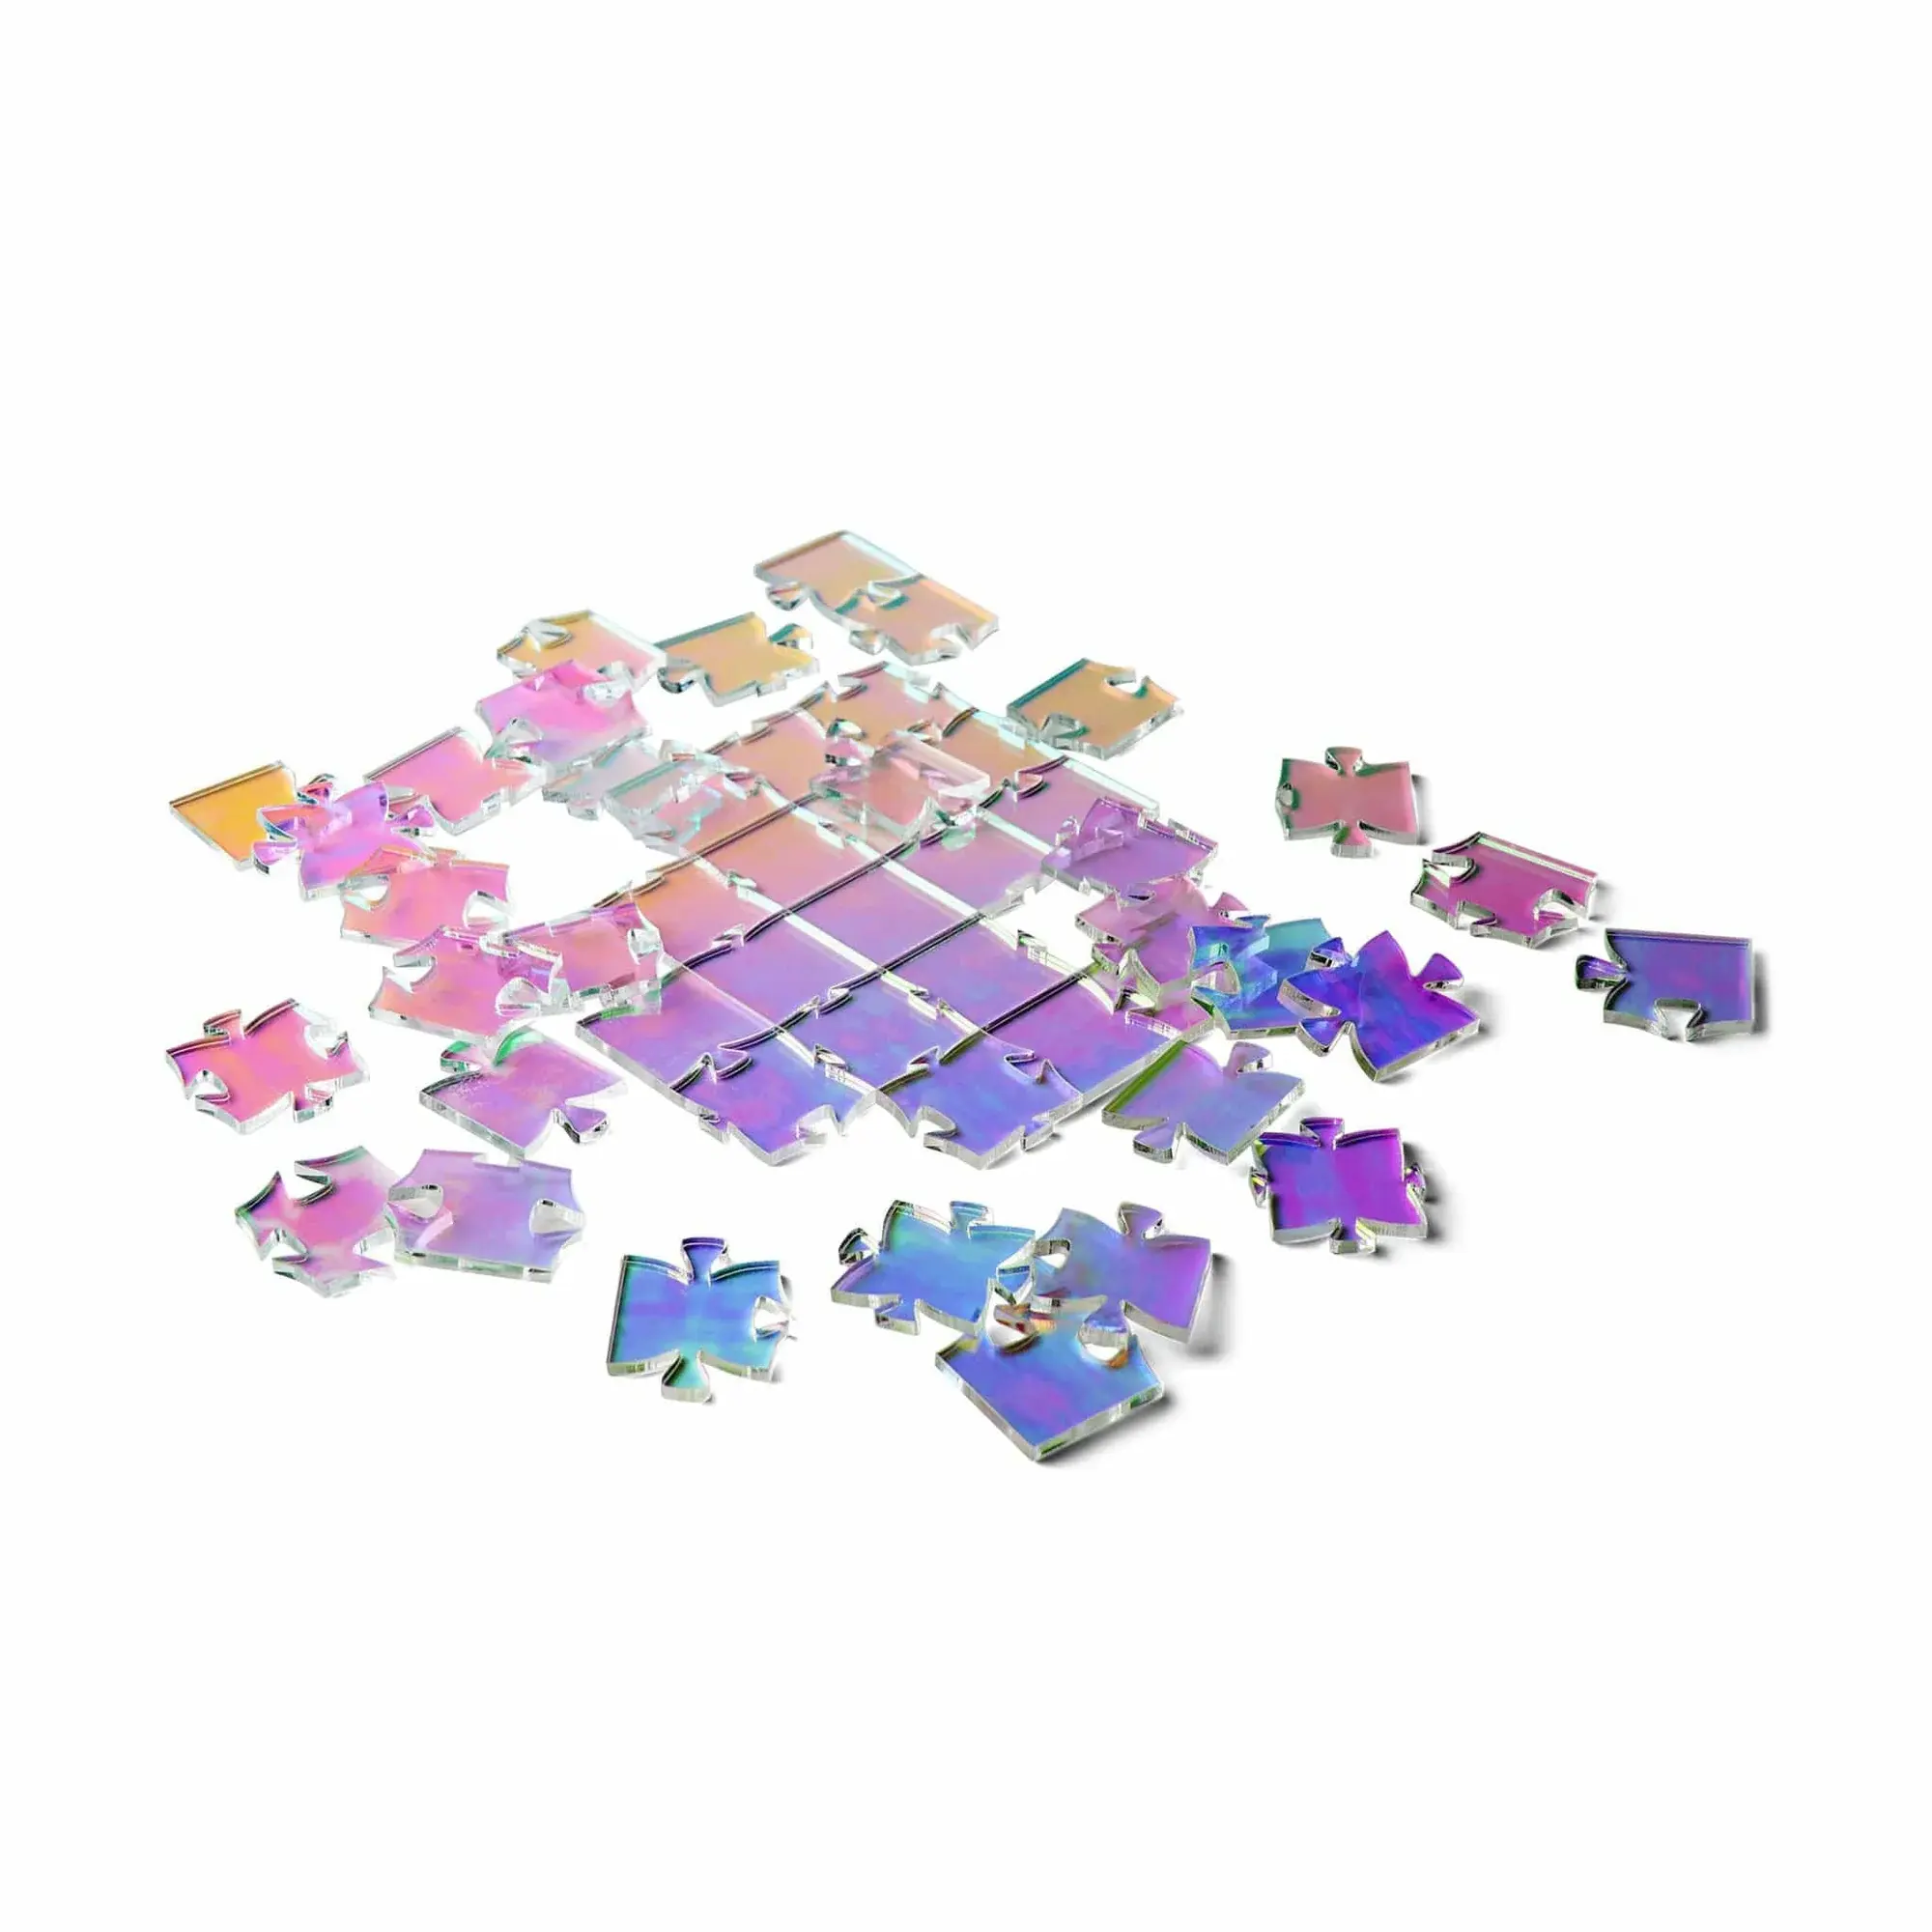 Education For Adults Teenagers Waves Square Puzzle Unique Iridescent Jigsaw Puzzle Brain Teaser Difficult Rainbow Puzzles